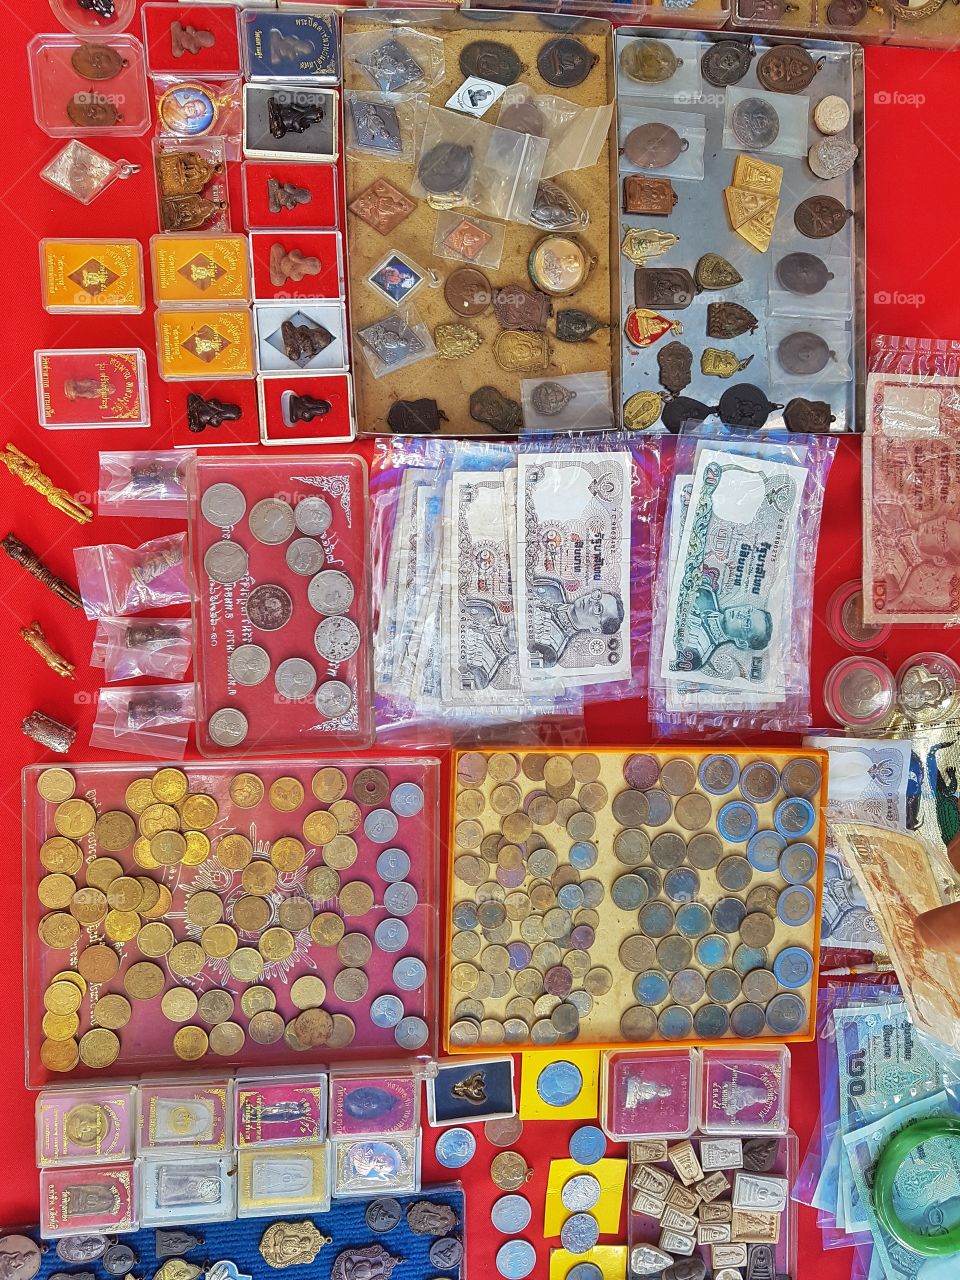 display of antique old Thai money coins and bank note at a flee market